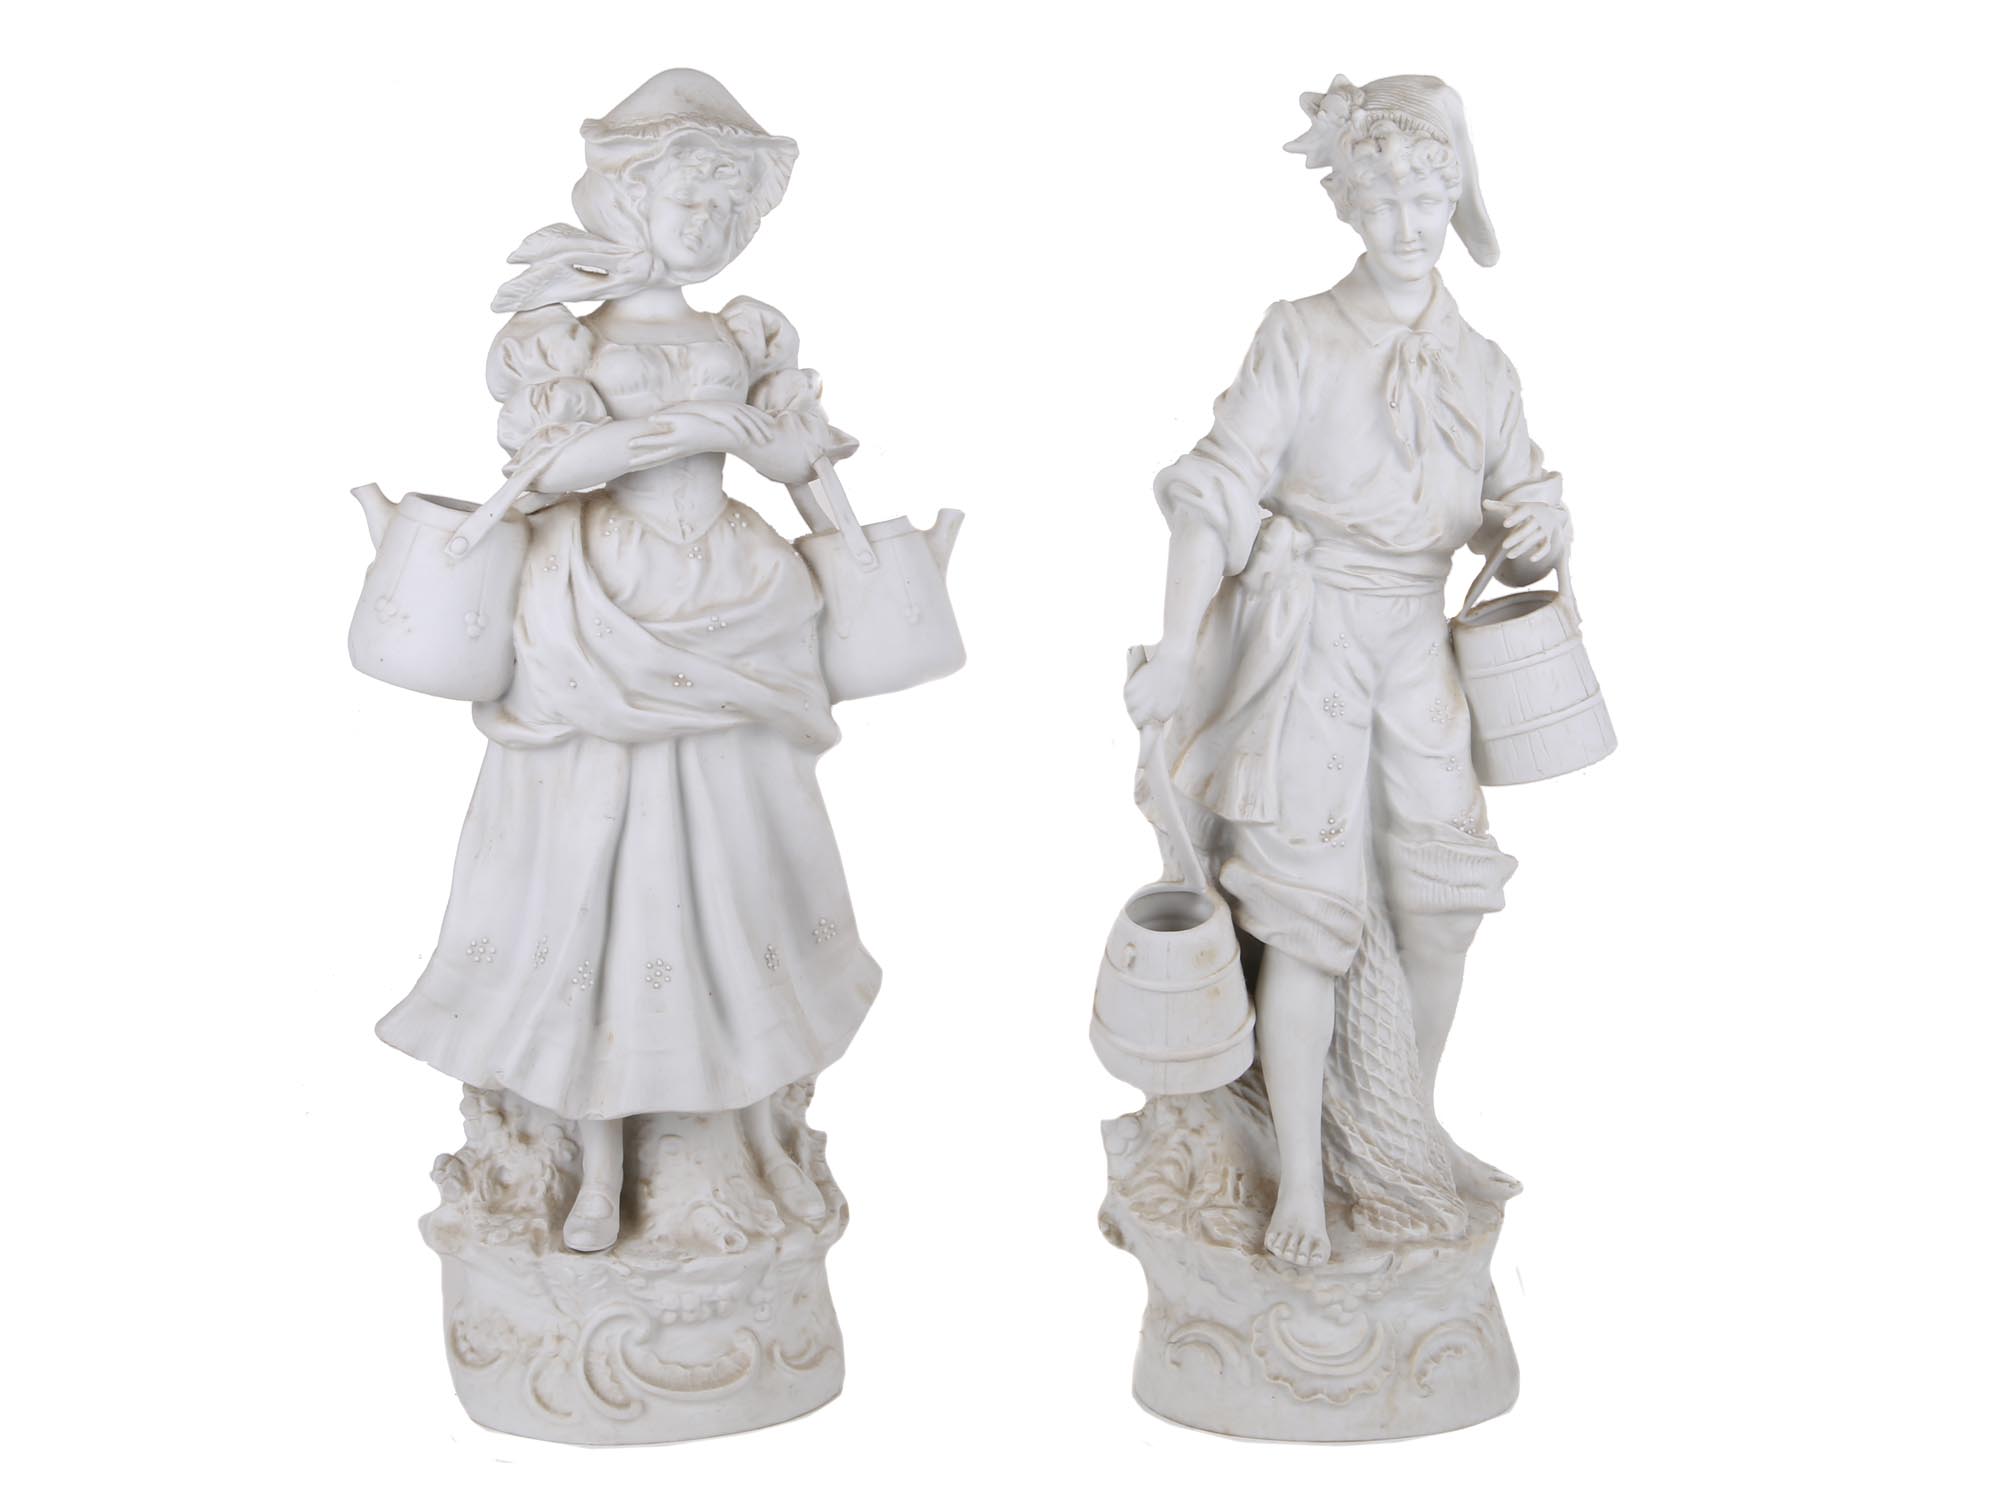 PAIR OF SEVRES STYLE BUSCUIT PORCELAIN FIGURINES PIC-0